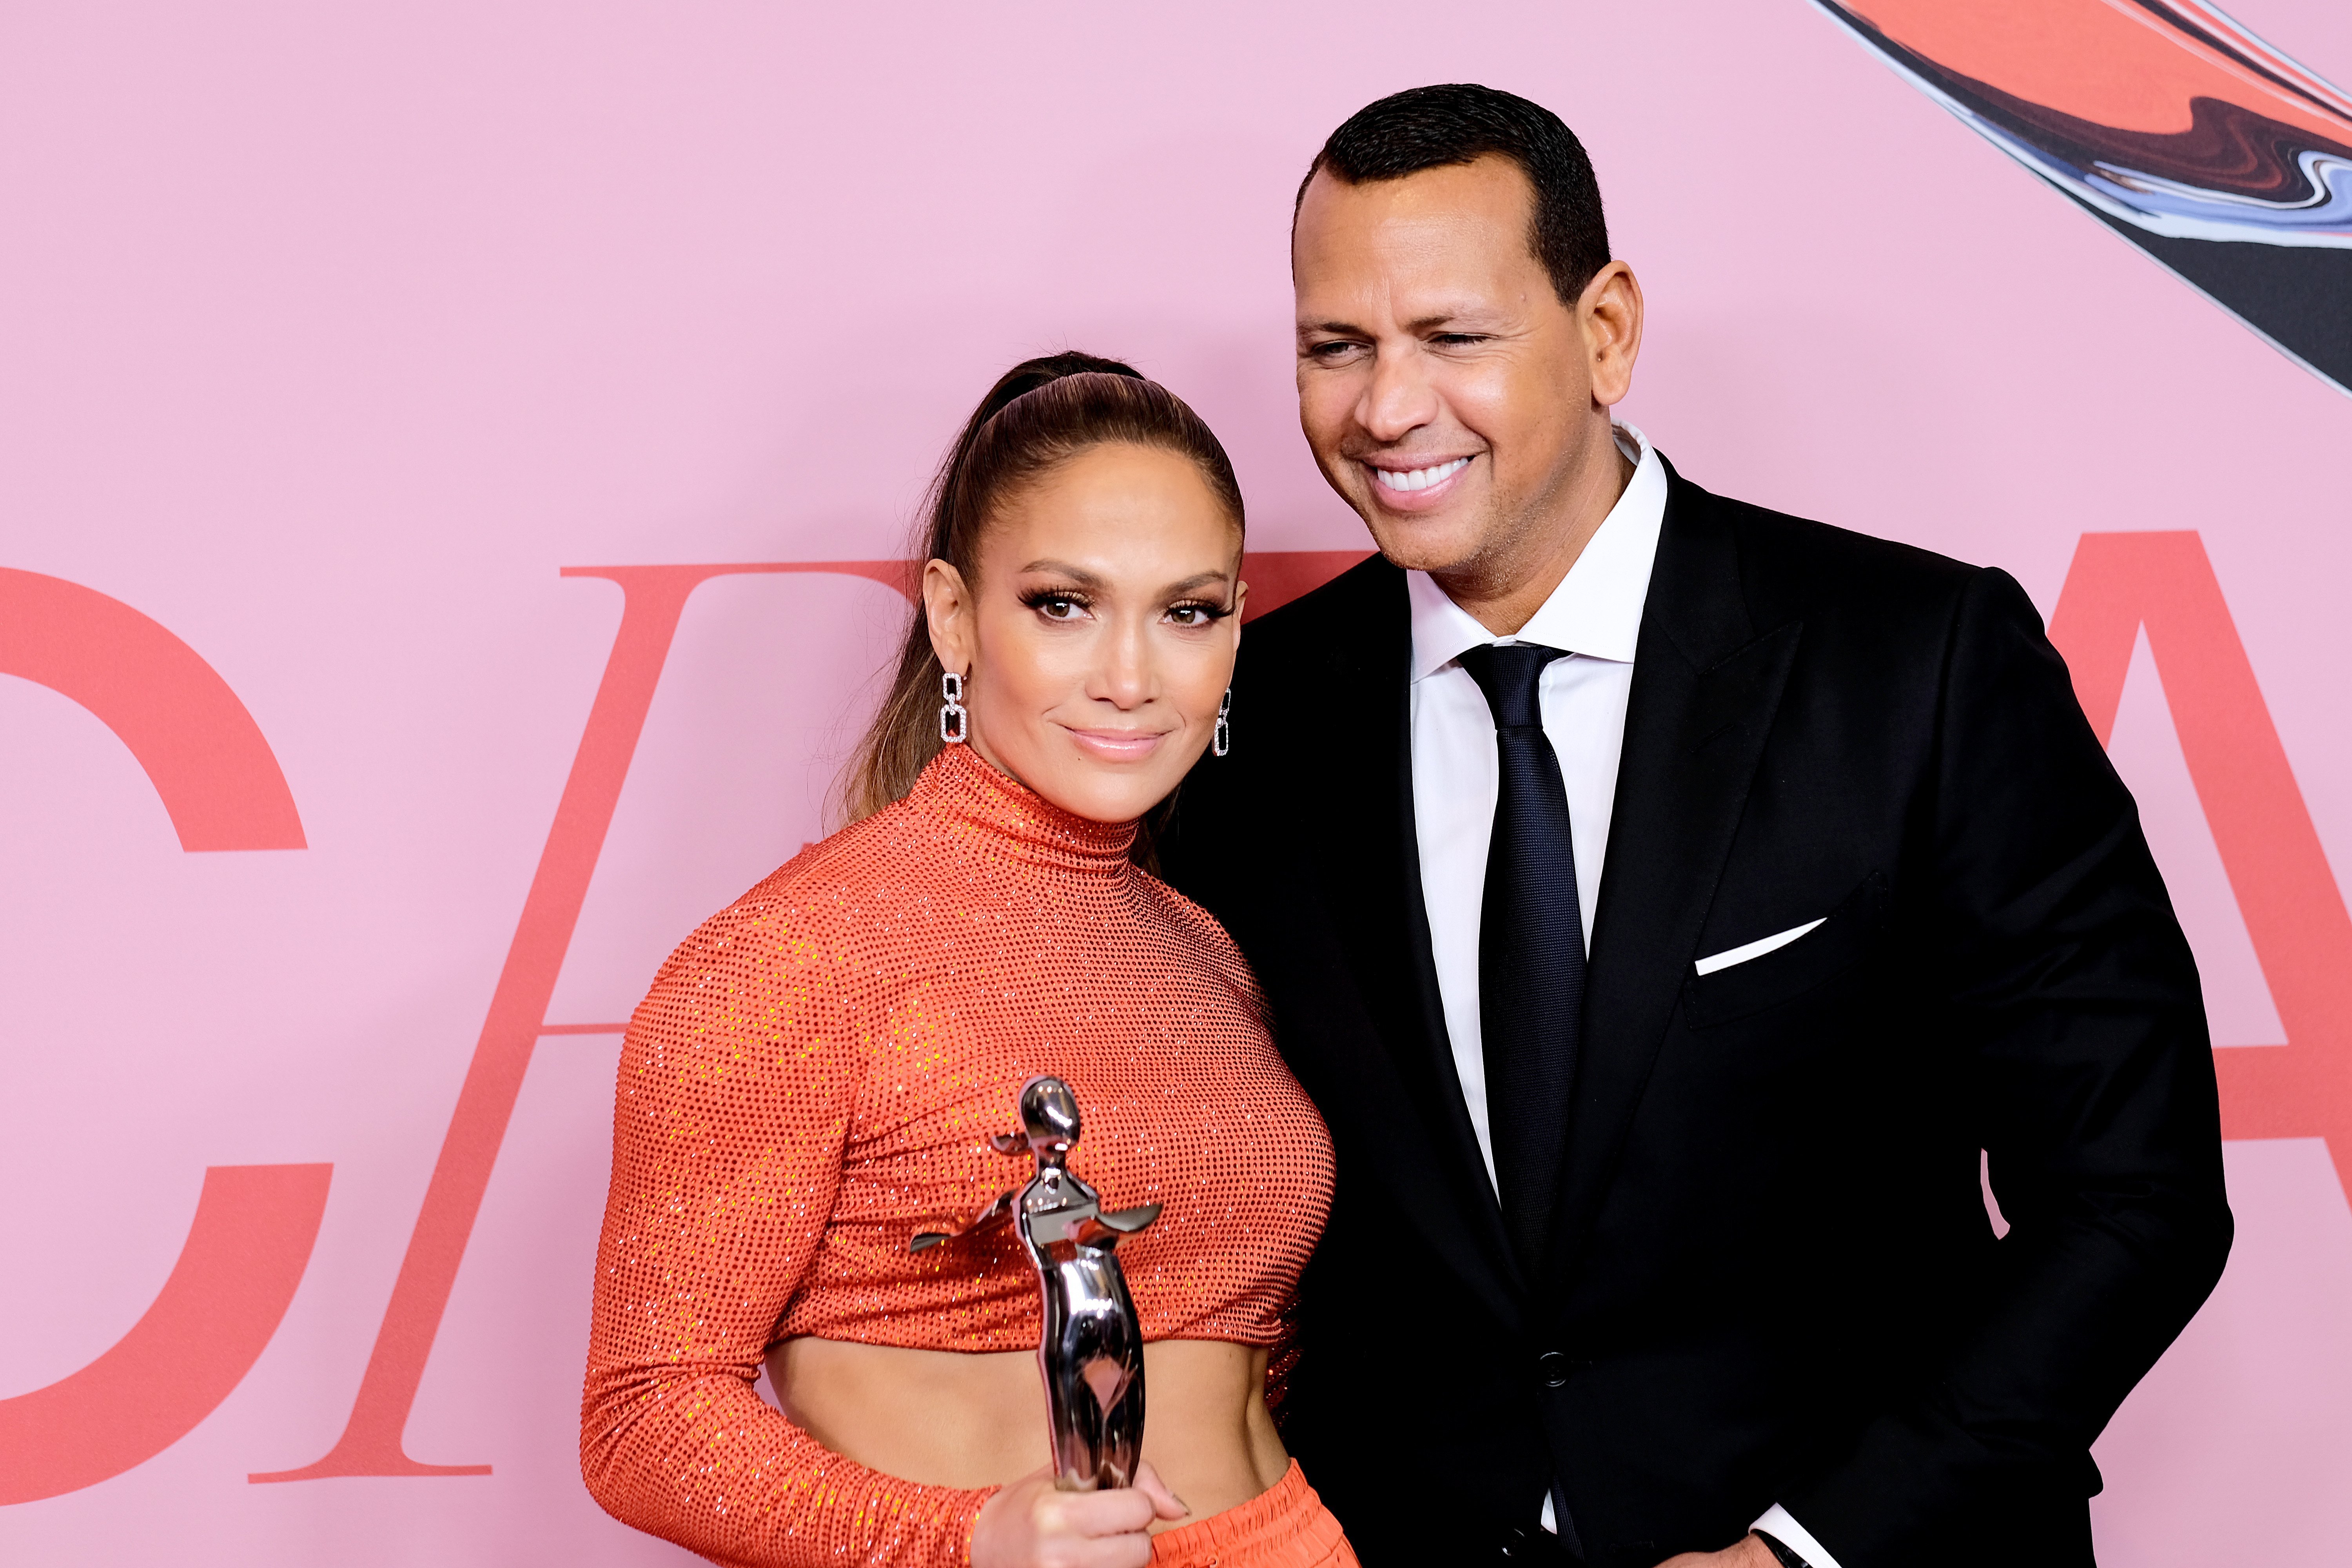 Jennifer Lopez poses with the Fashion Icon Award and Alex Rodriguez during Winners Walk during the CFDA Fashion Awards on June 03, 2019, in New York City. | Source: Getty Images.